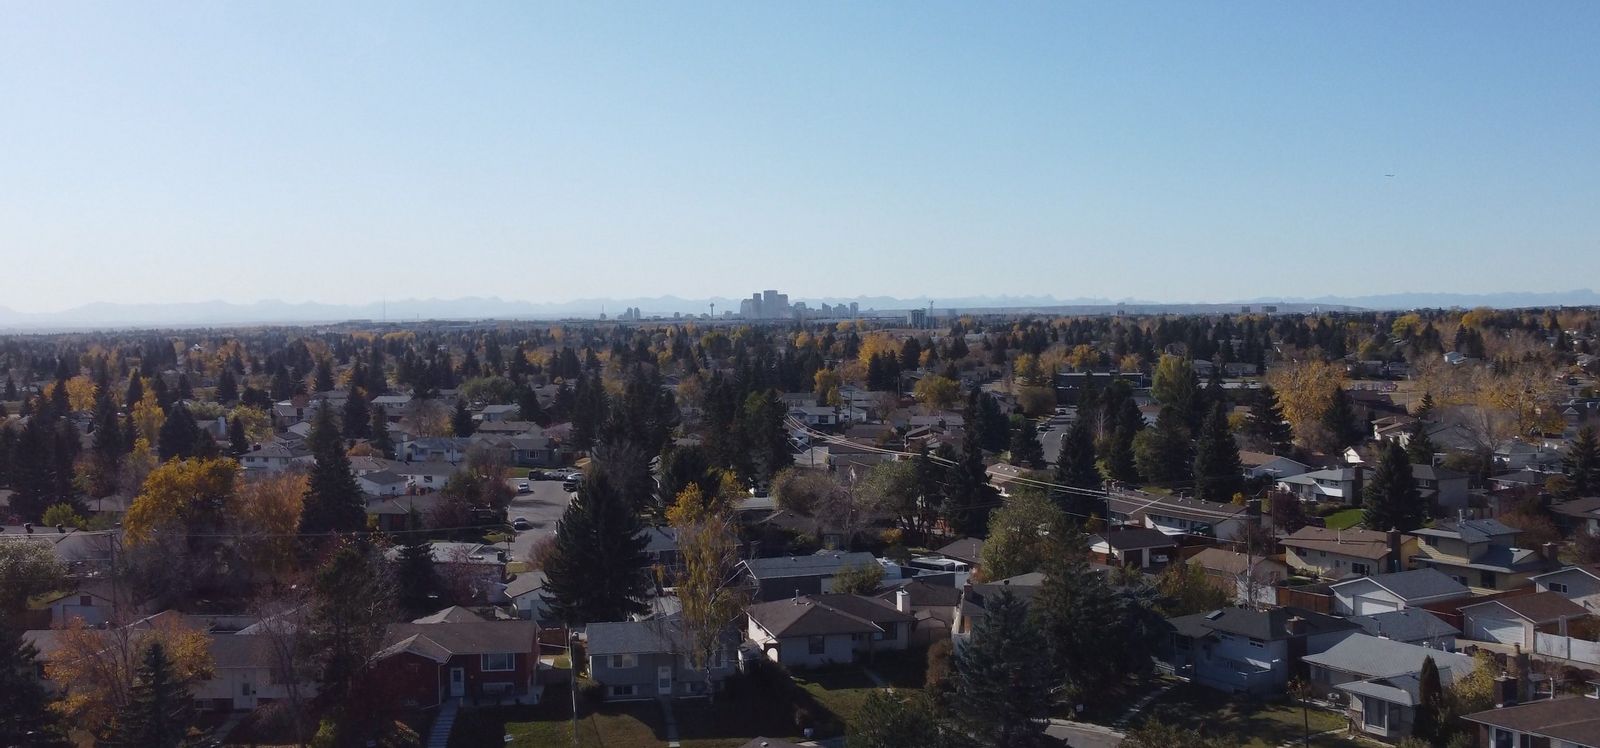 Thinking of Moving to Calgary? Looking at Northeast properties? Here is our guide!